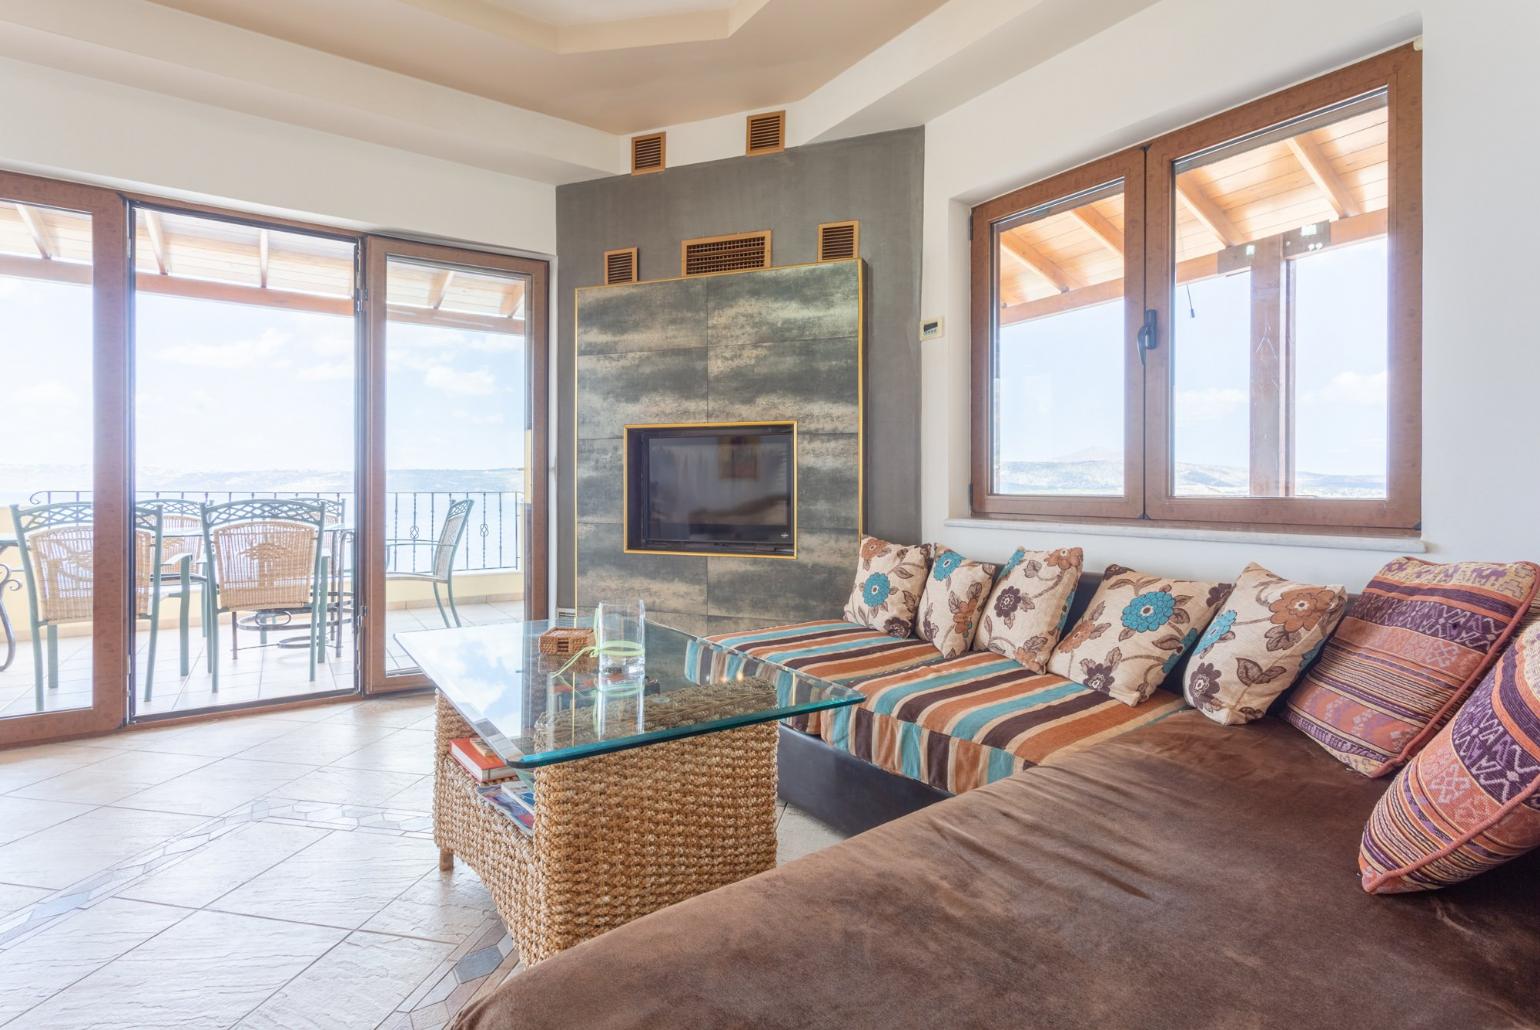 Open-plan living room with sofas, dining area, kitchen, WiFi internet, satellite TV, DVD player, and balcony access with panoramic sea views